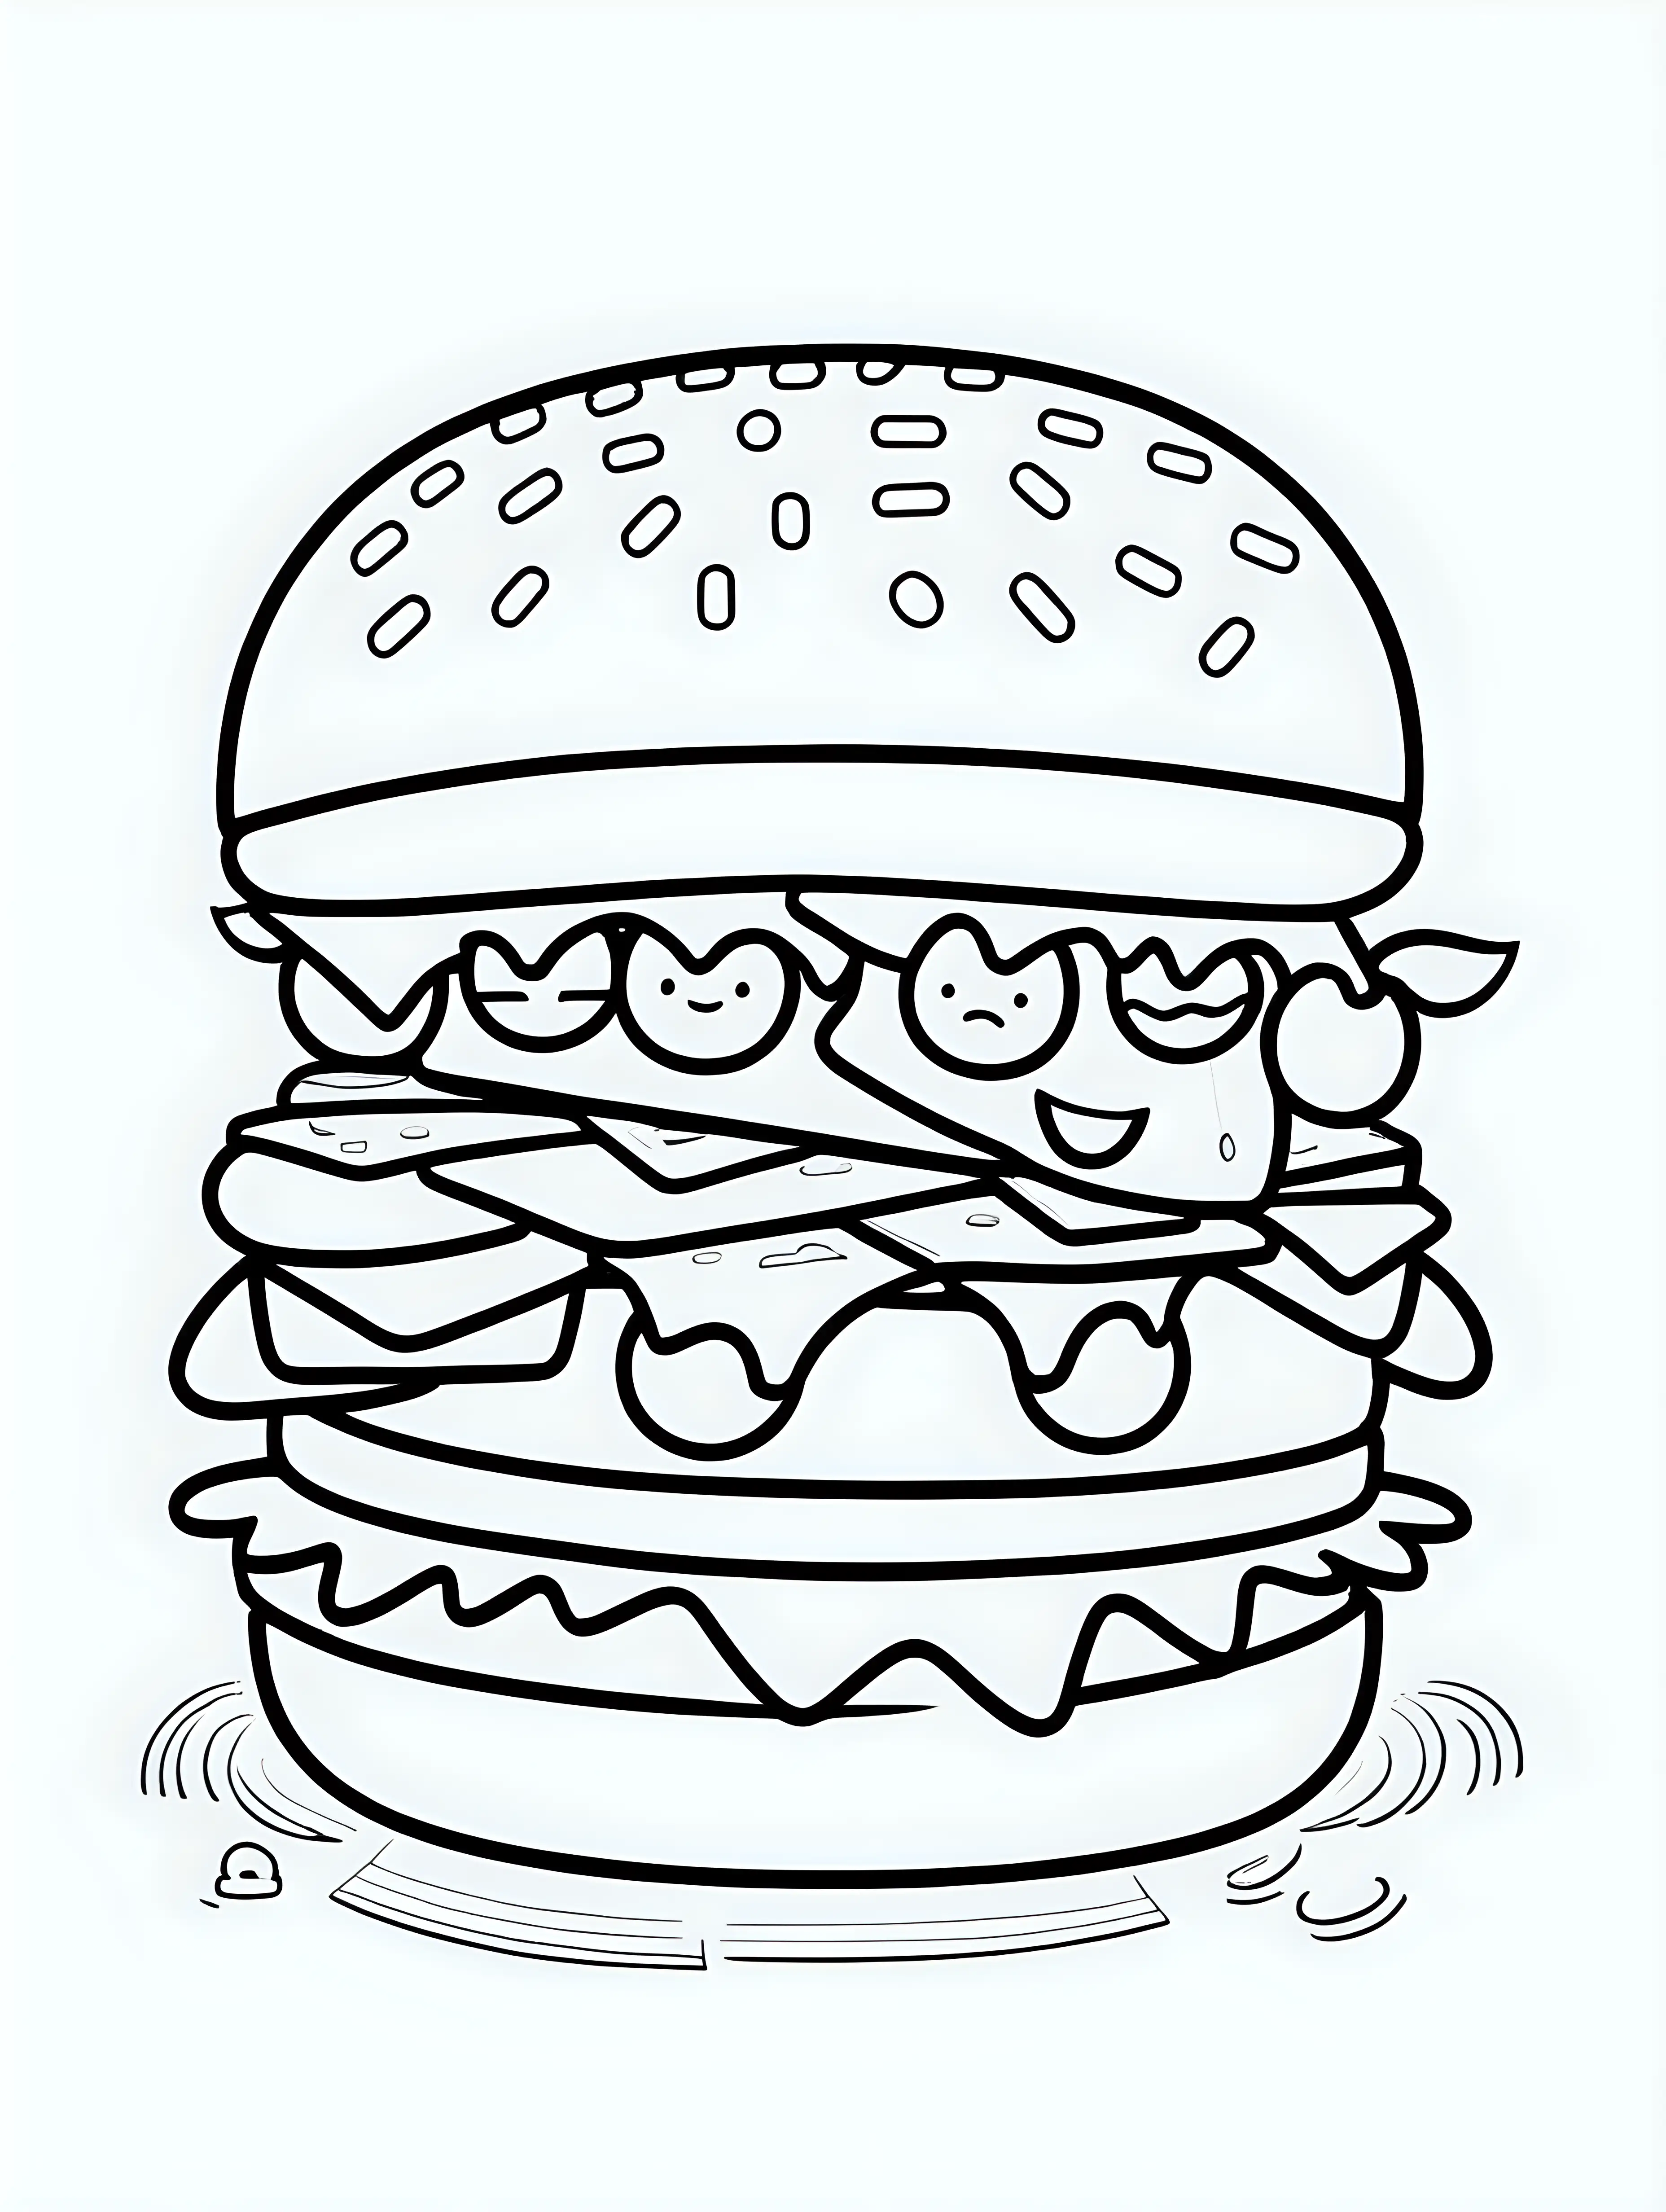 Adorable Cartoon Burger Coloring Page on a Clean White Background